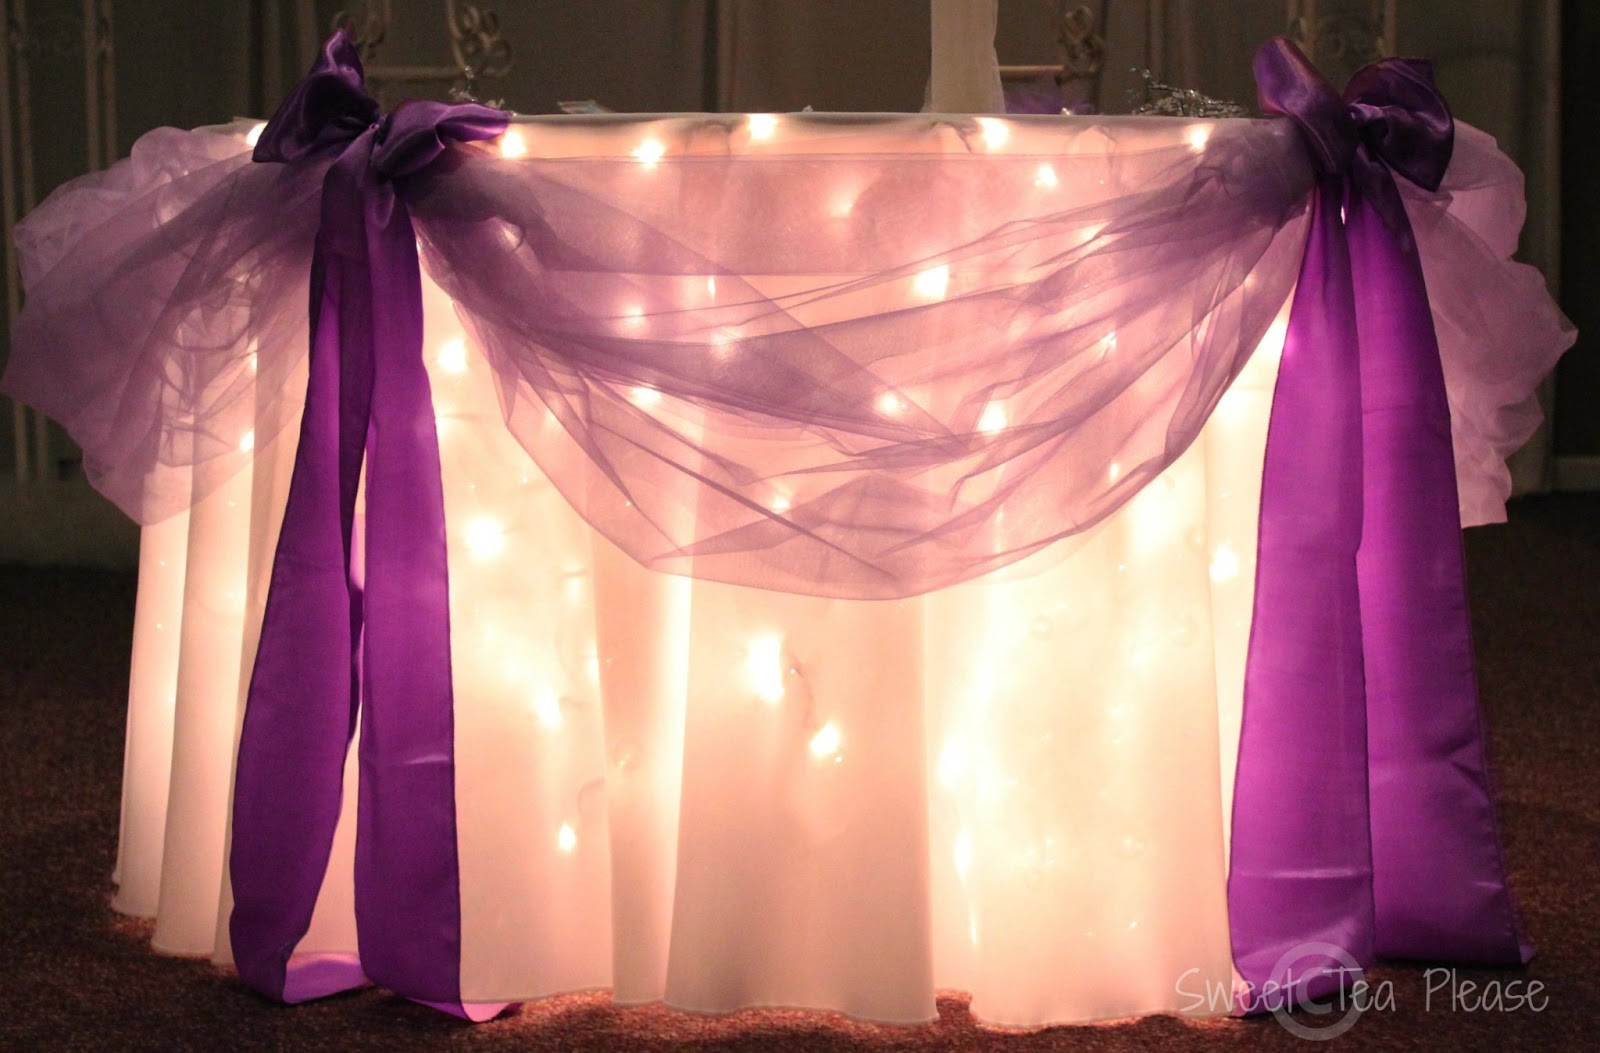 Andrea Howard Blog: Decorating a Cake Table With Lights and Tulle  A 